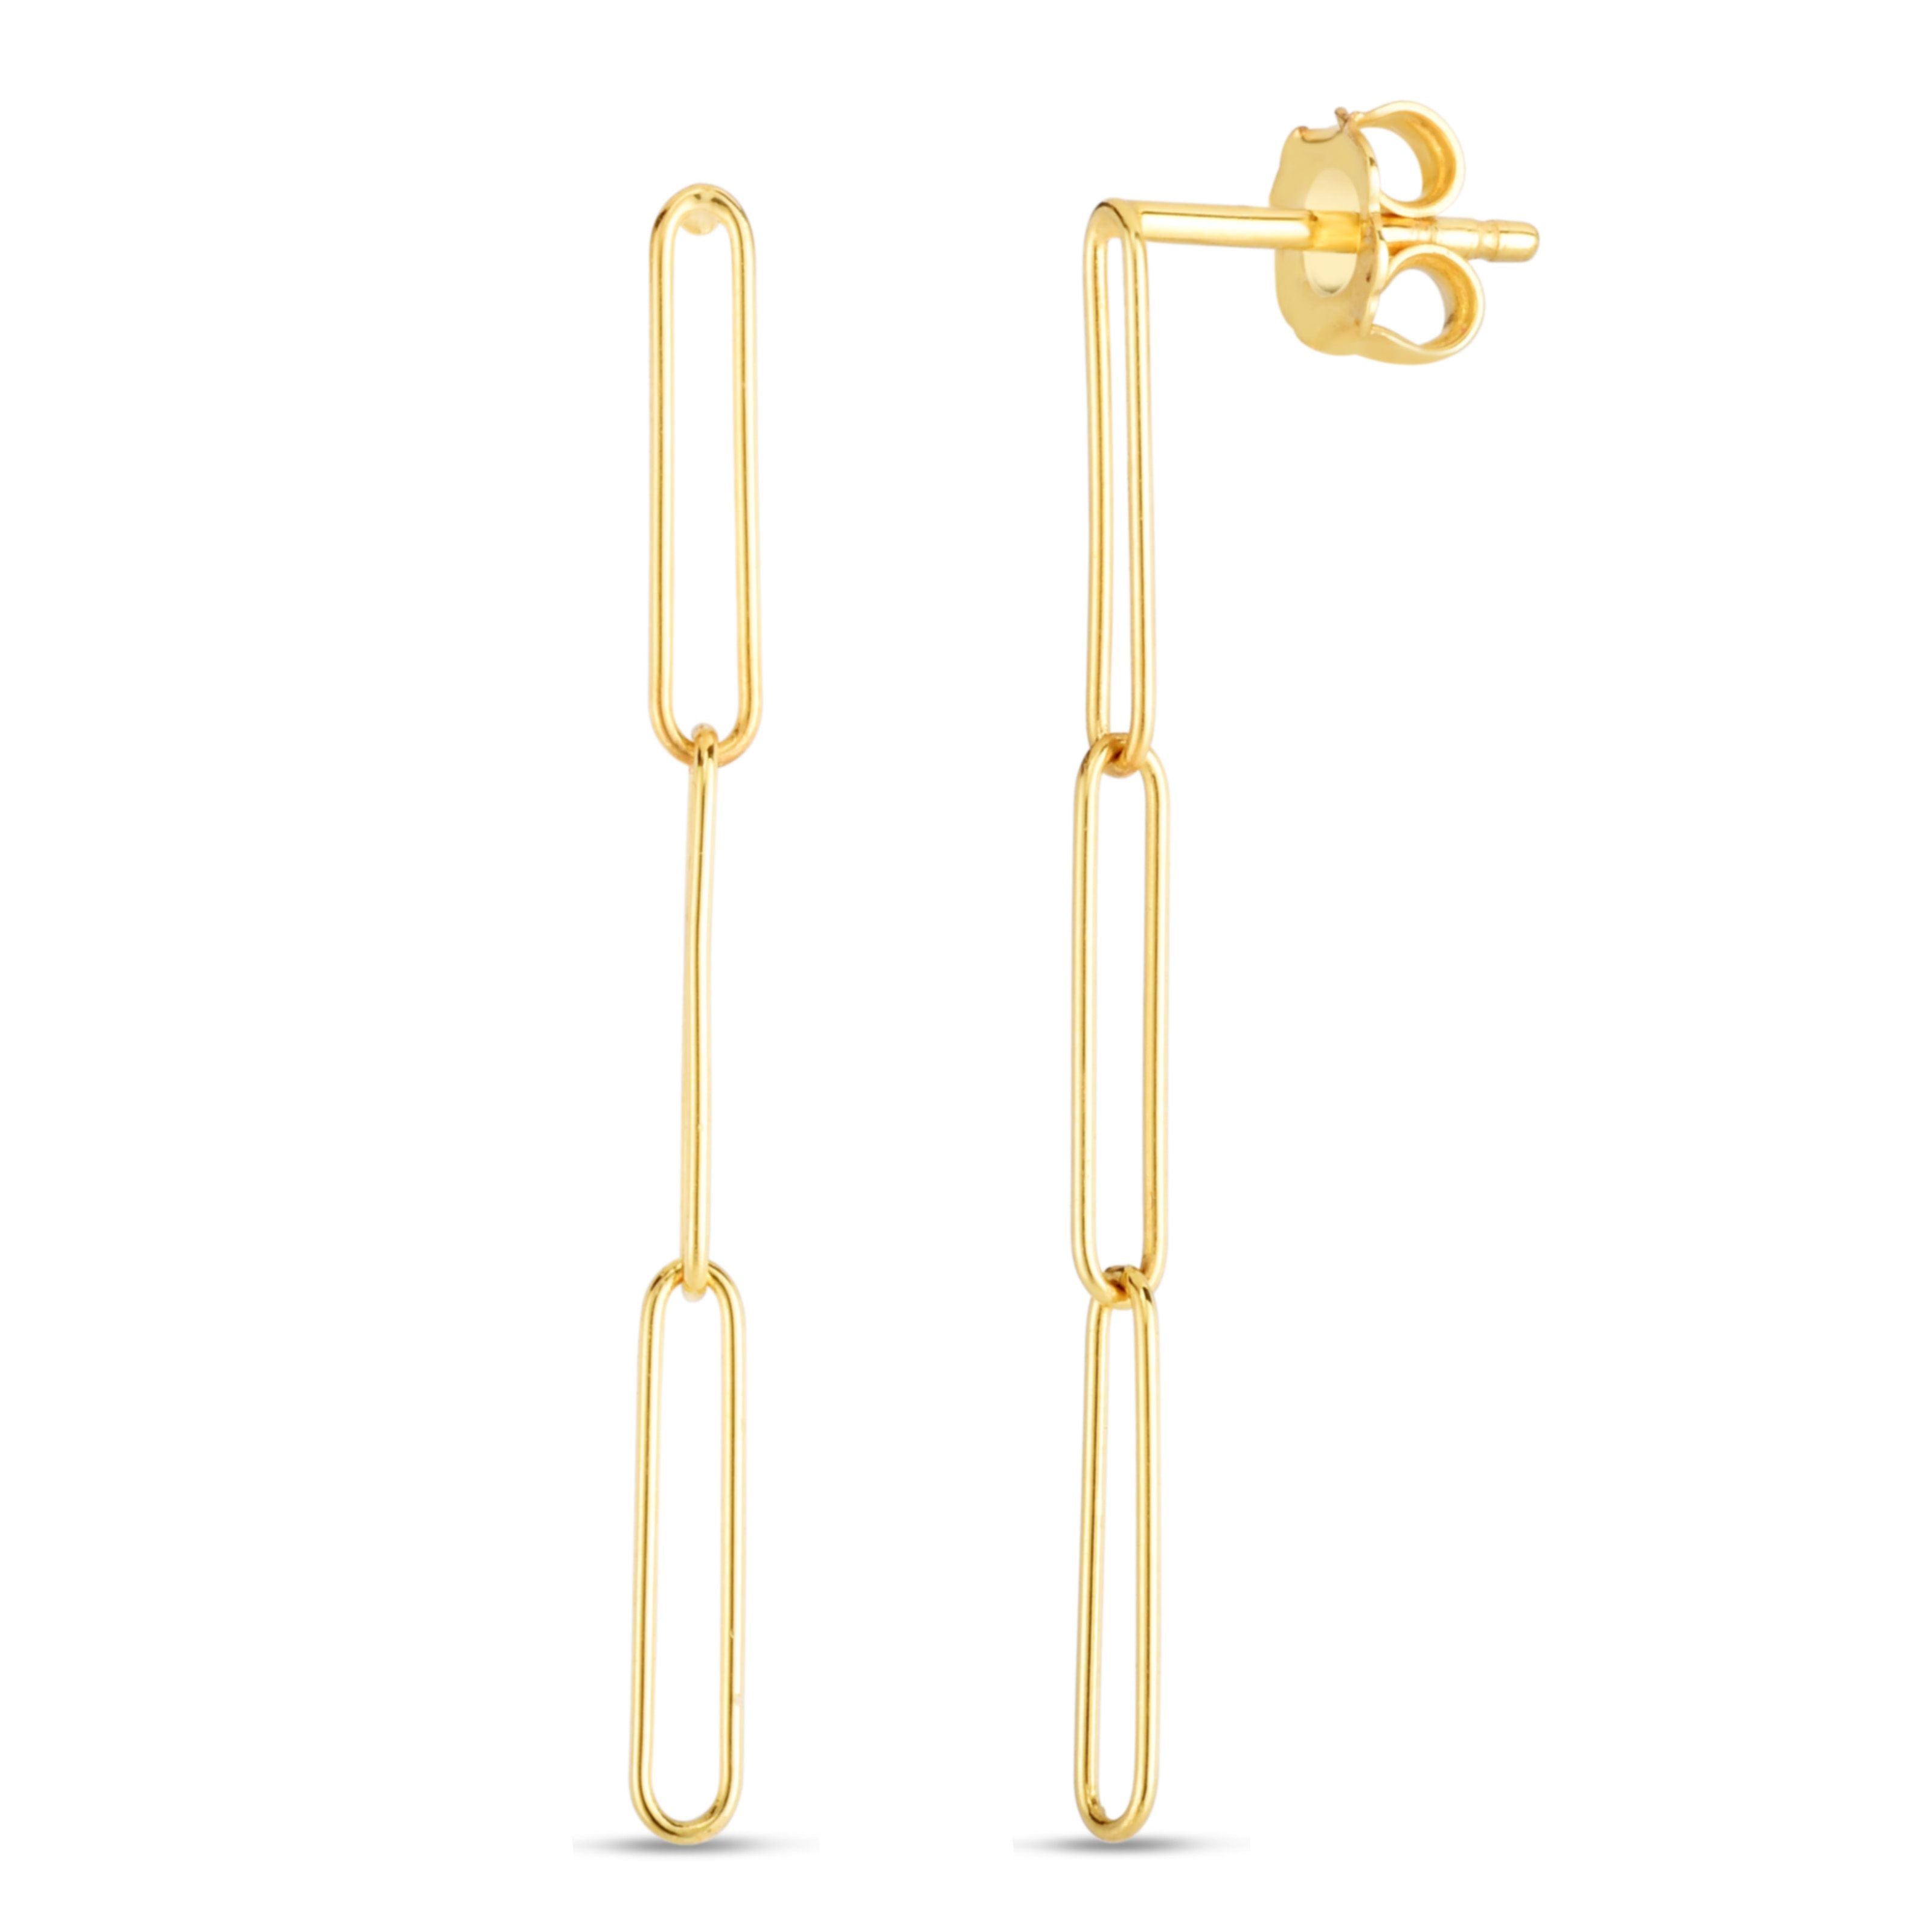 A pair of gold earrings on a white background